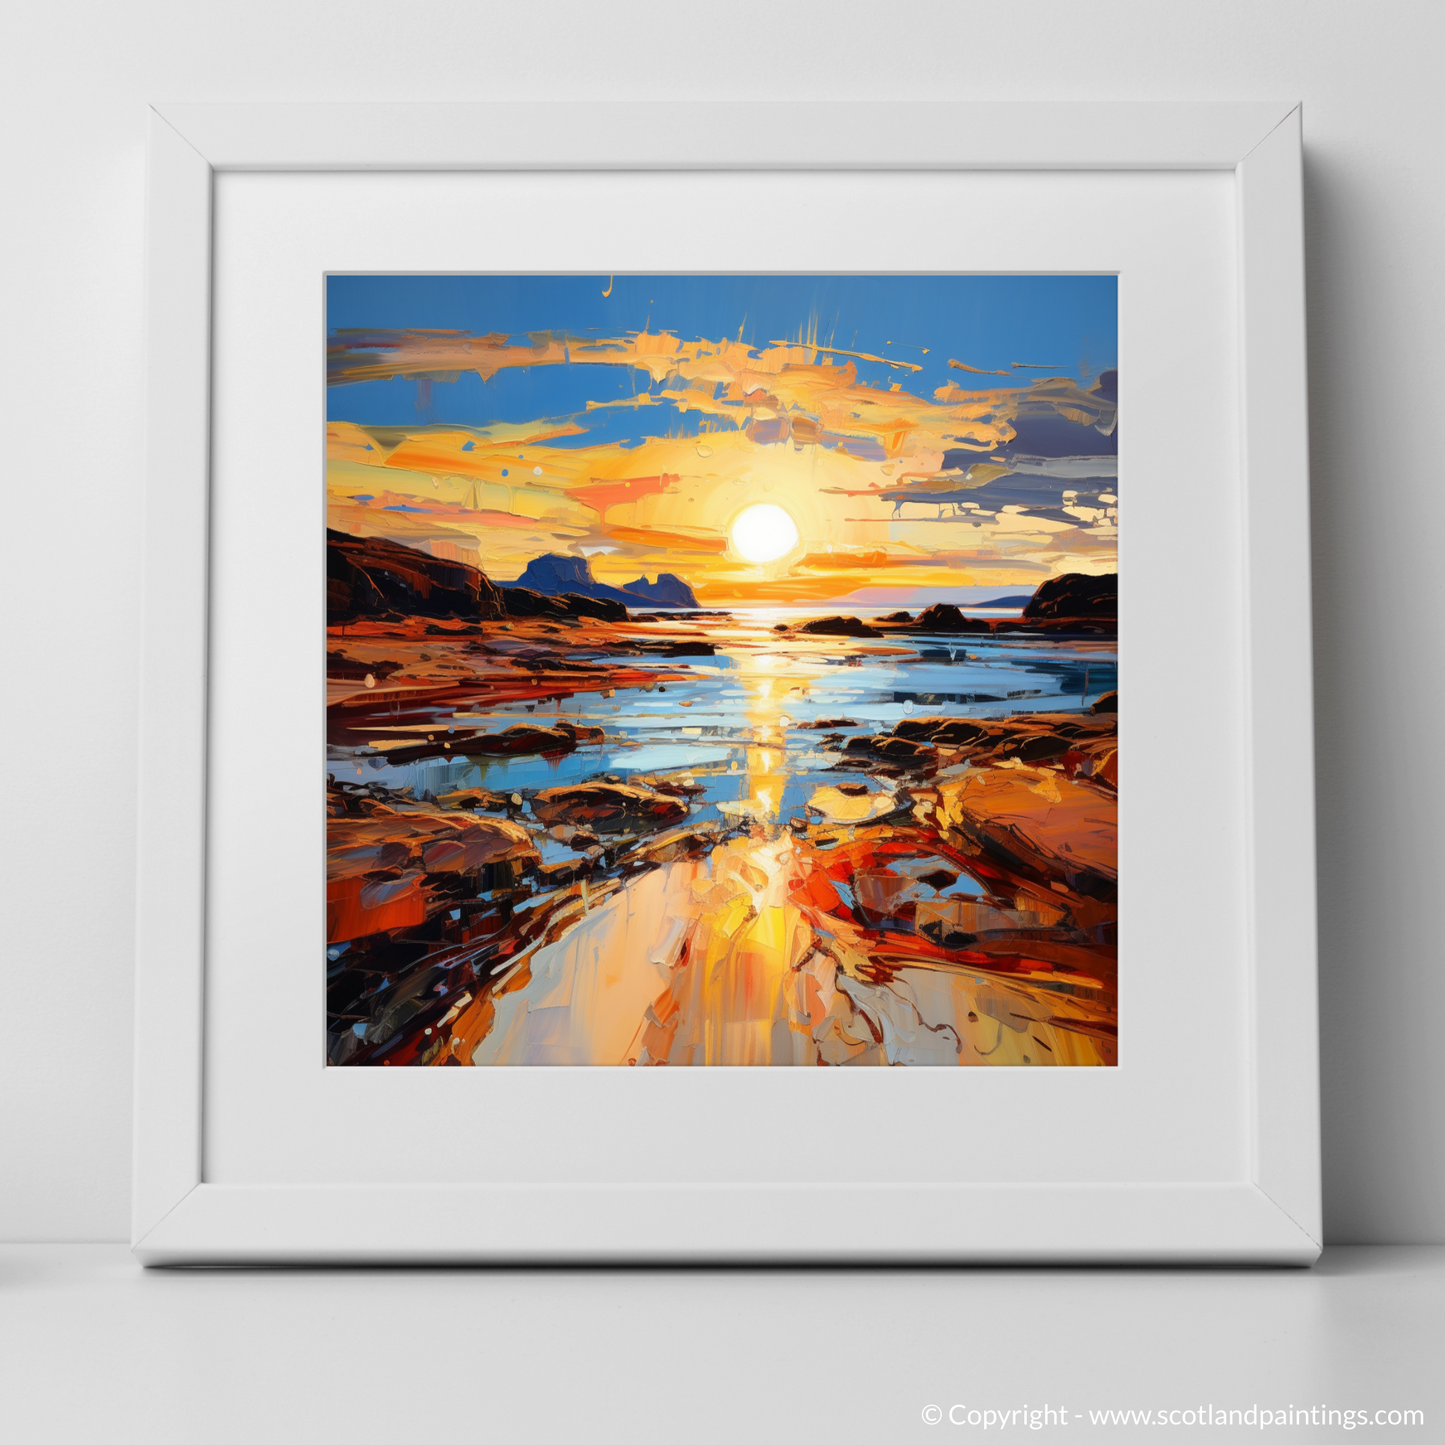 Art Print of Sound of Iona at golden hour with a white frame